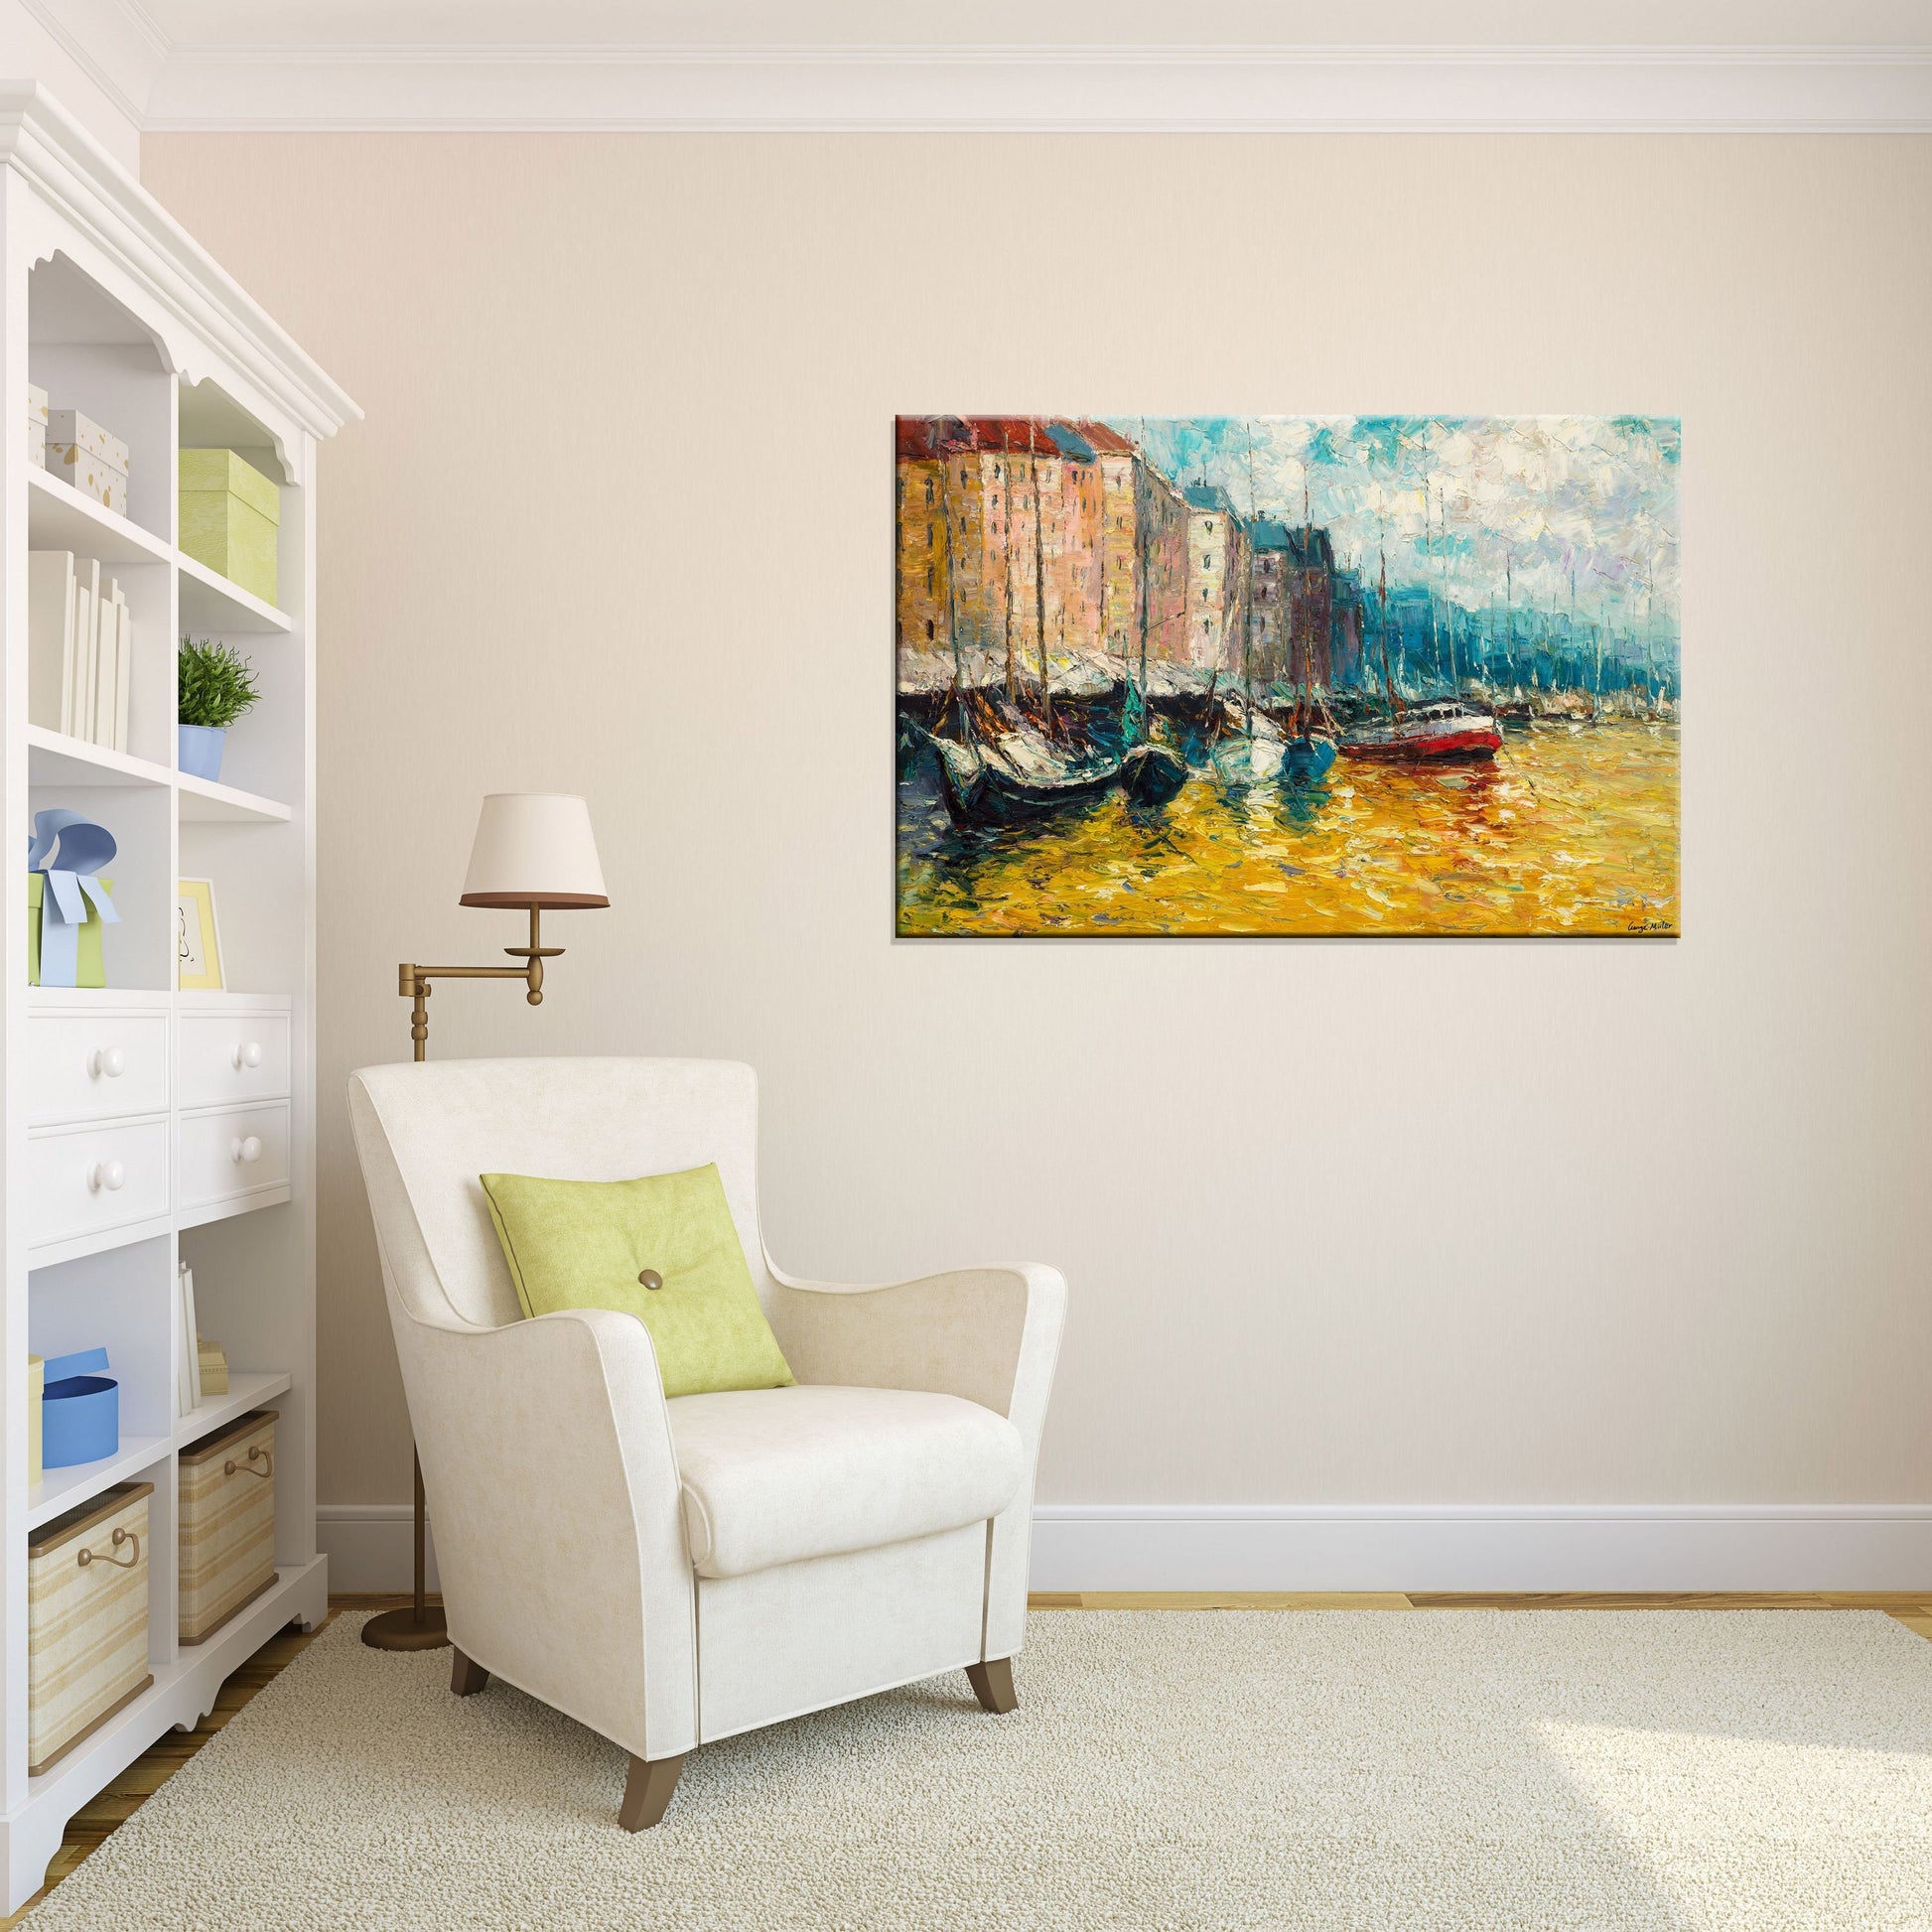 Venice Oil Painting, Gondola, Landscape Painting, Modern Painting, Wall Art, Large Canvas Art, Painting Abstract, Palette Knife Painting